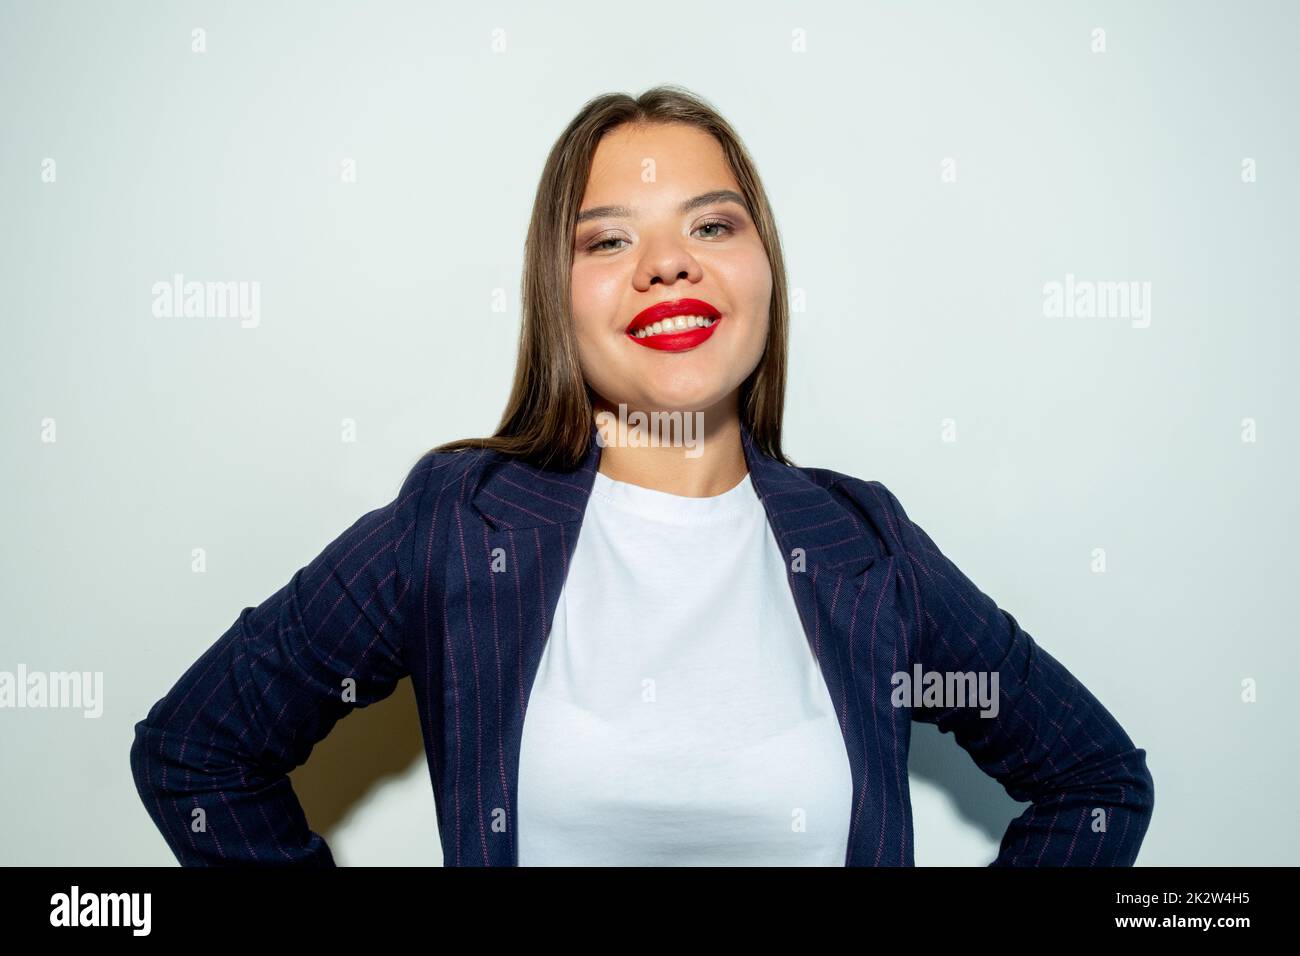 Successful business woman. Positive attitude. Fun lifestyle. Goal achievement. Portrait of cheerful arrogant lady looking at camera smiling isolated o Stock Photo